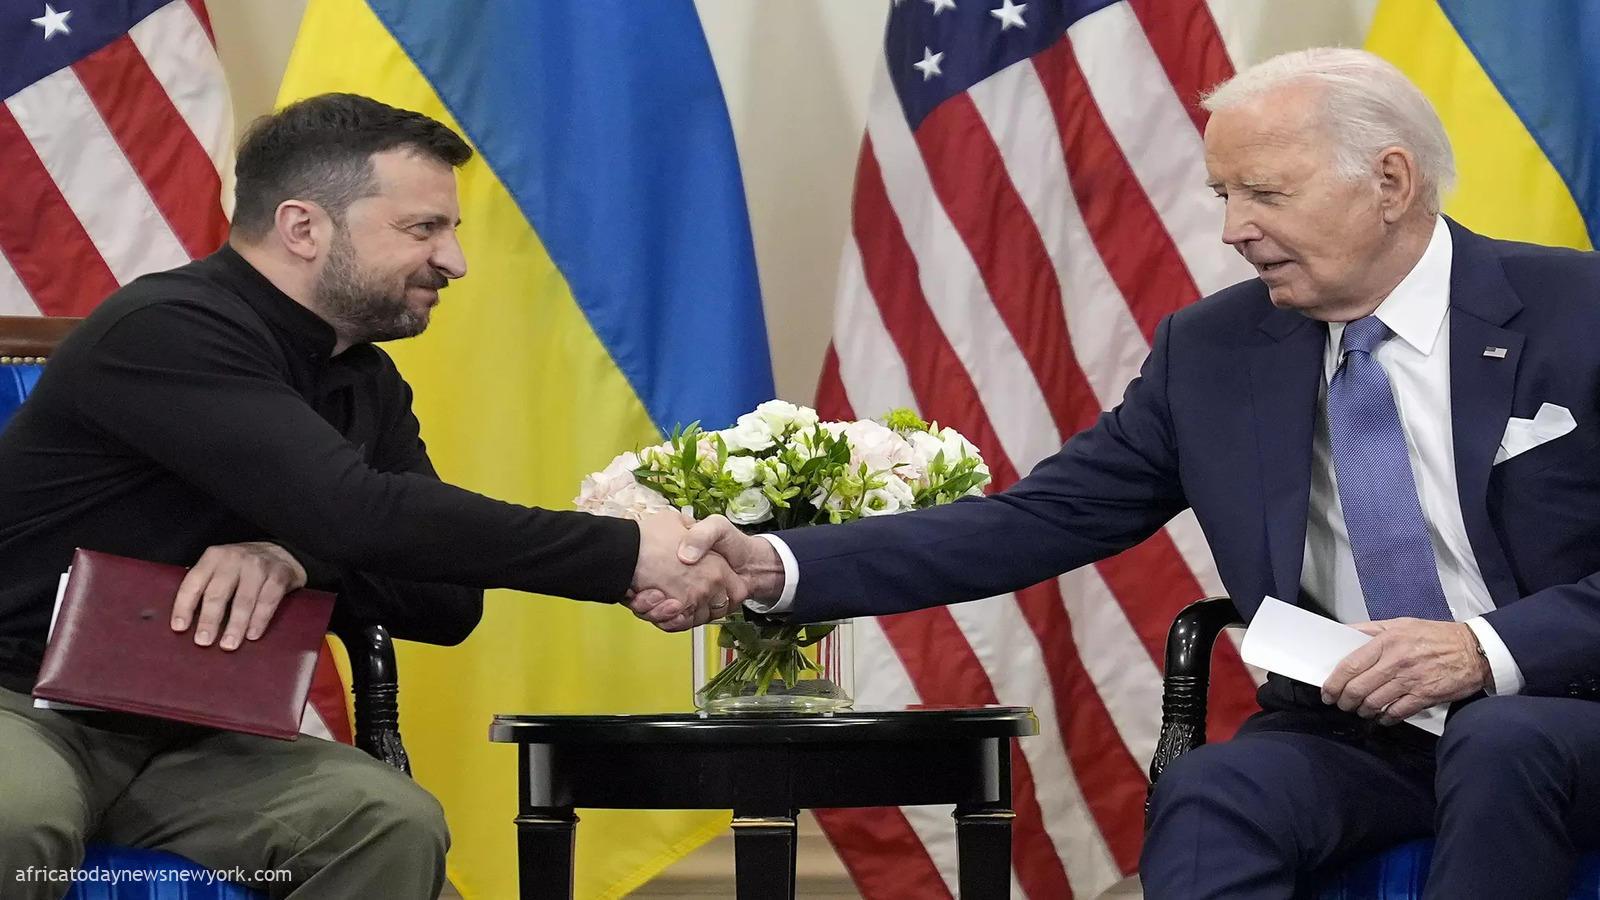 Biden Apologizes To Zelenskyy For Aid Delays, Lauds Efforts